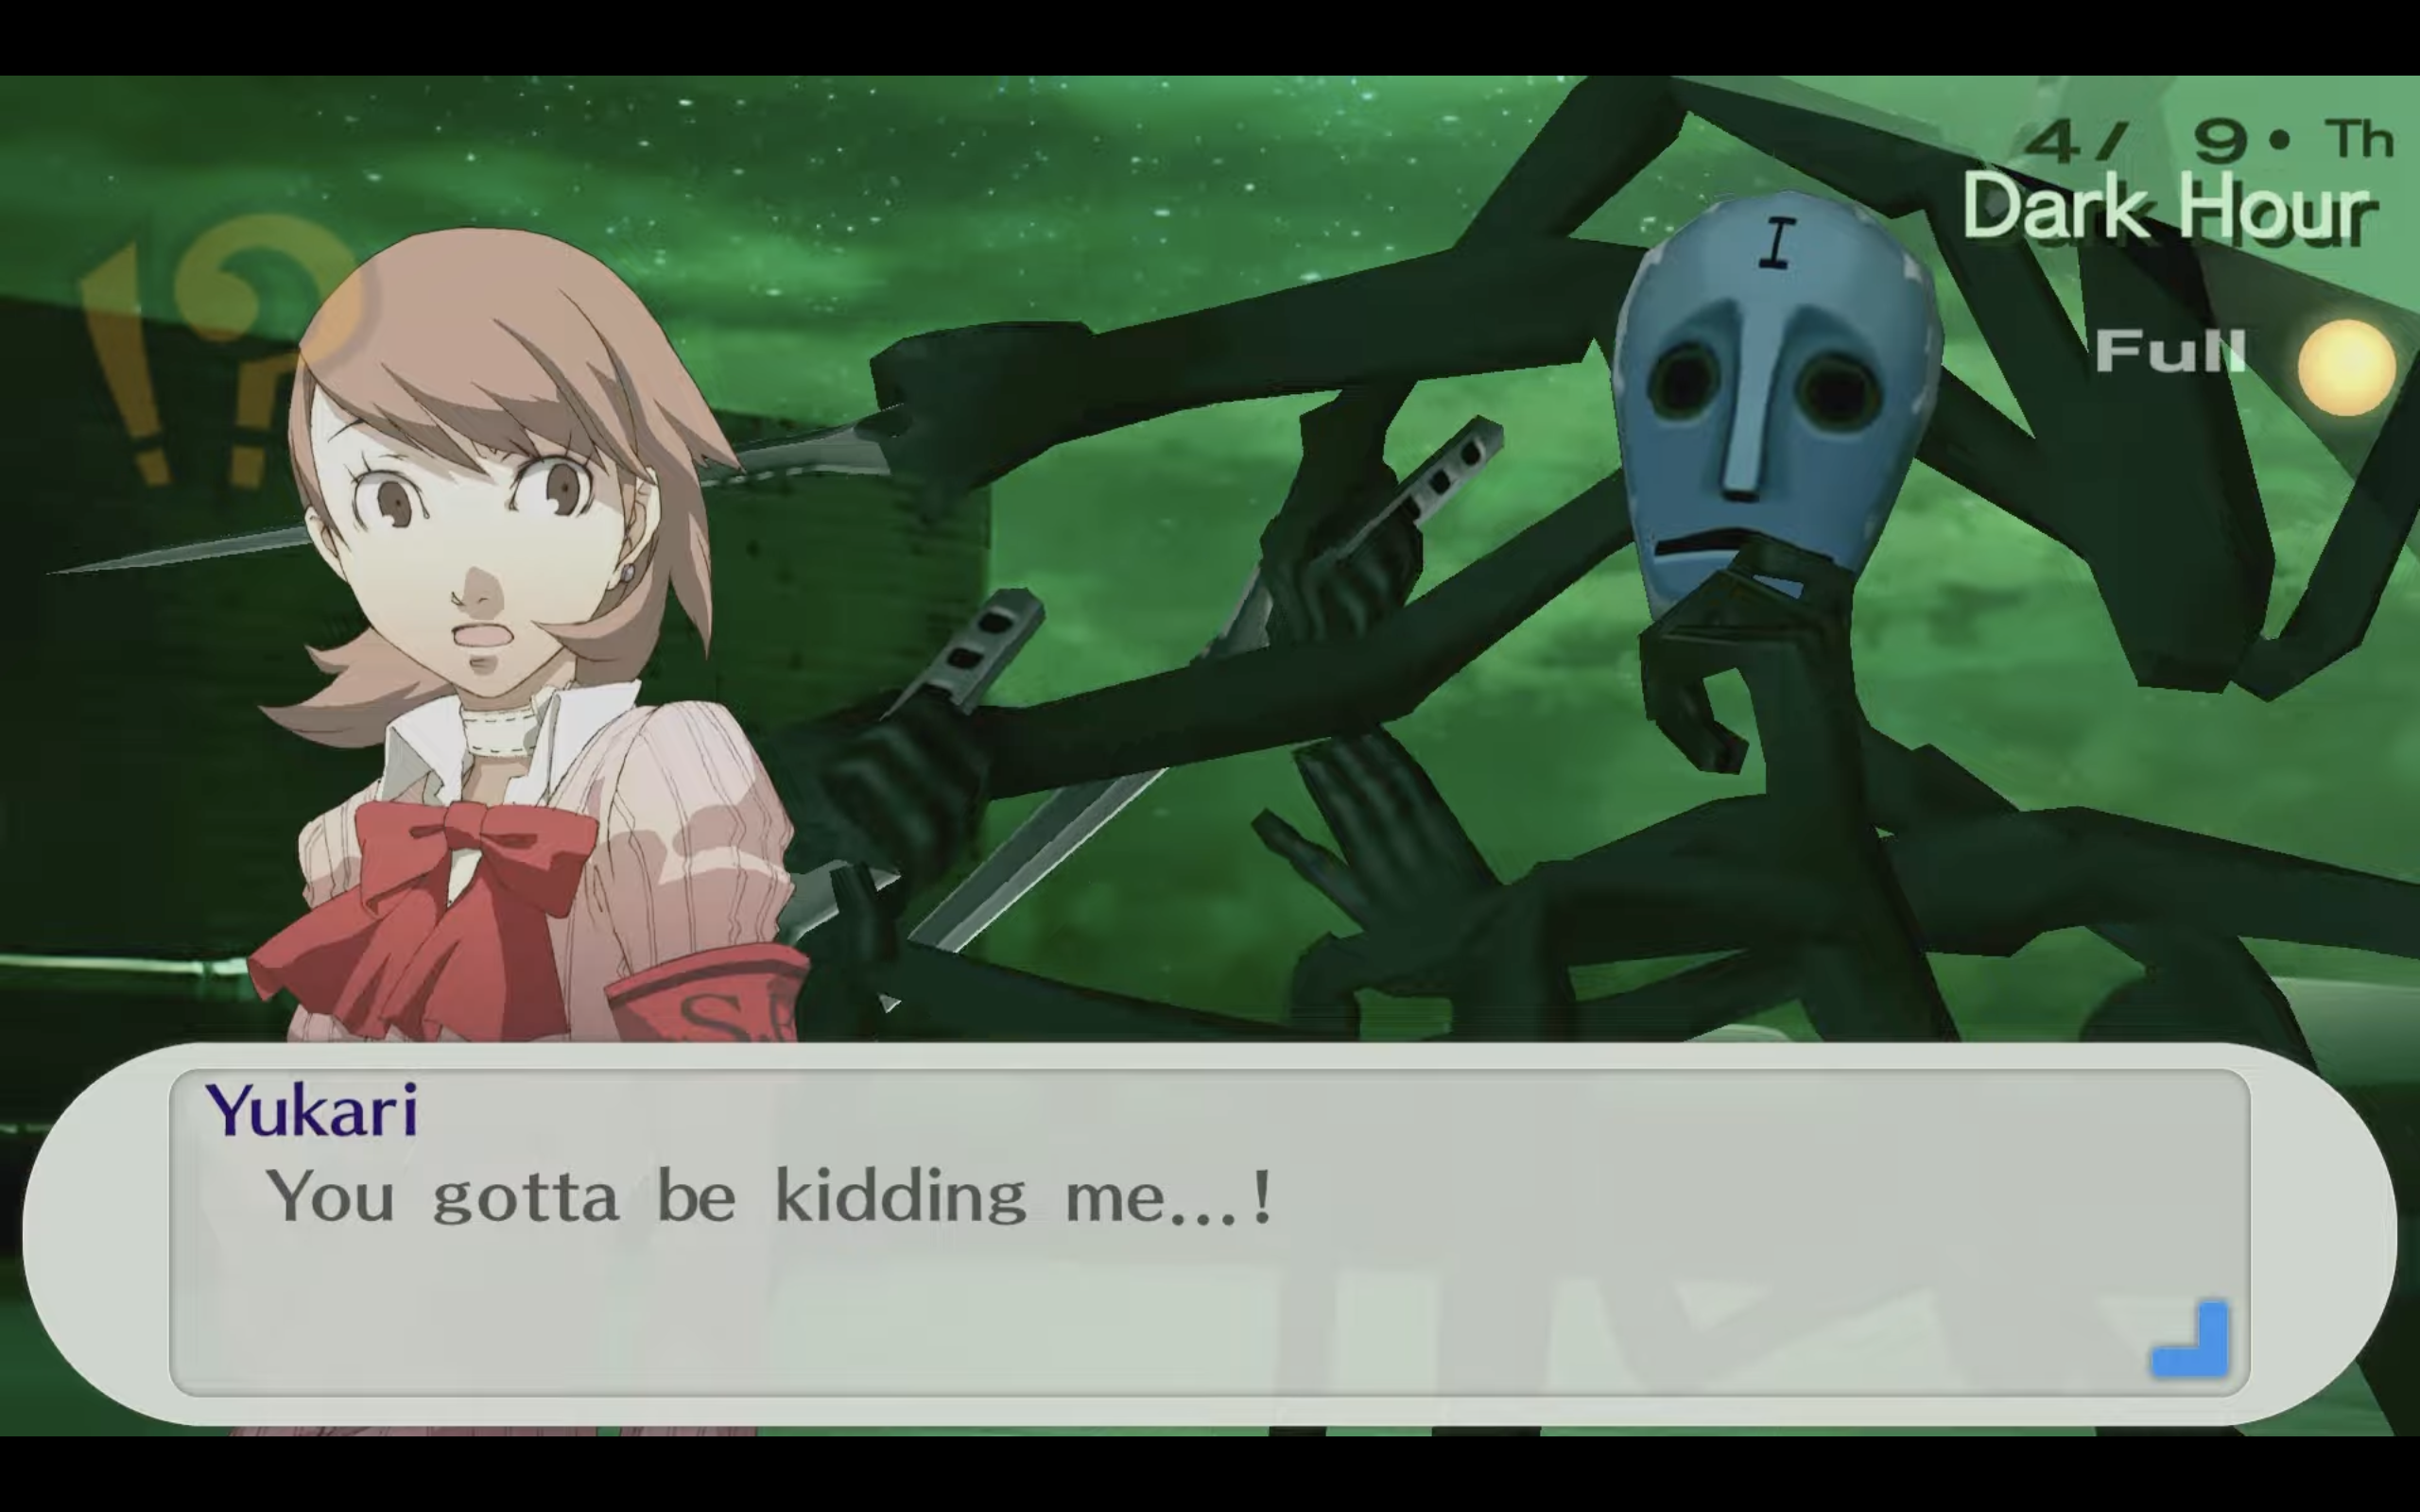 Persona 3 Portable and Persona 4 Golden Launch Trailers Set the Stage